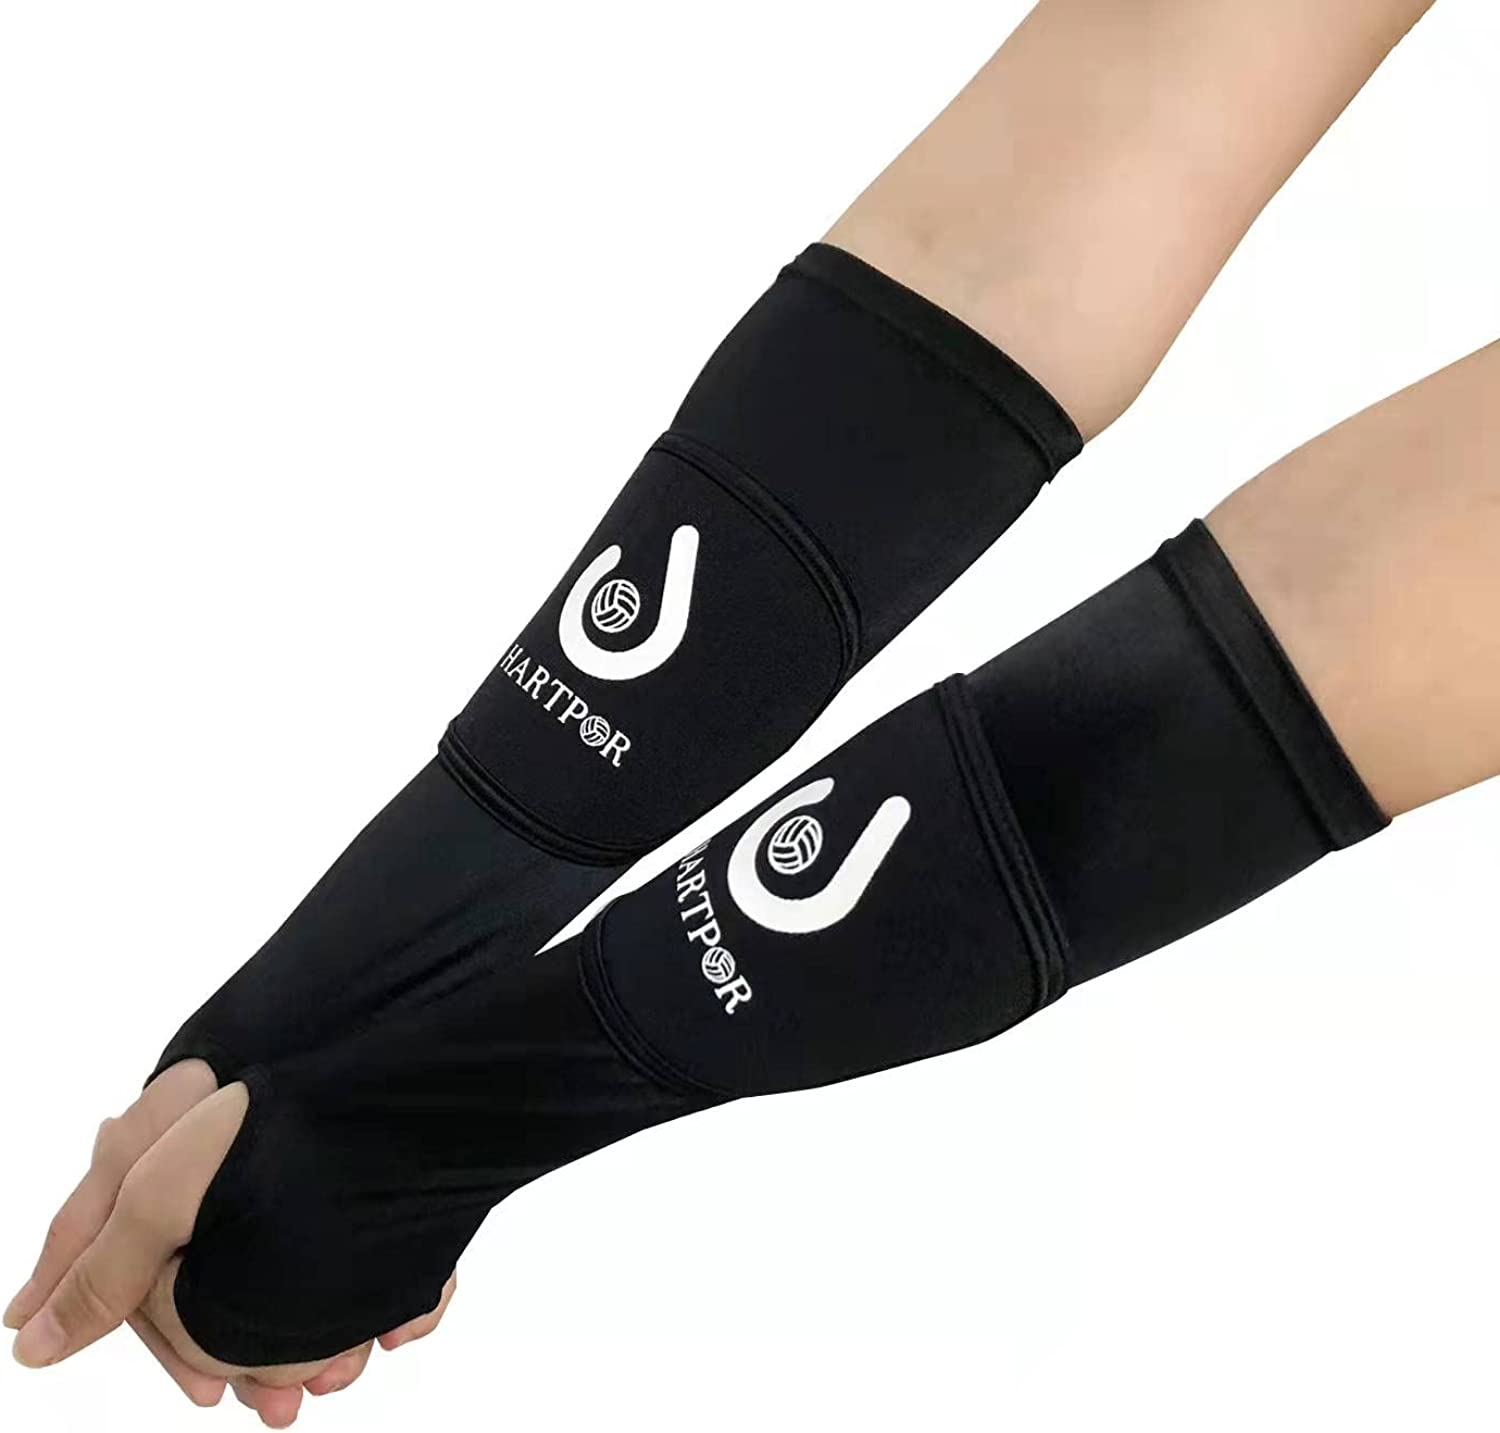 Arm Sleeve Volleyball WholeSale - Price List, Bulk Buy at